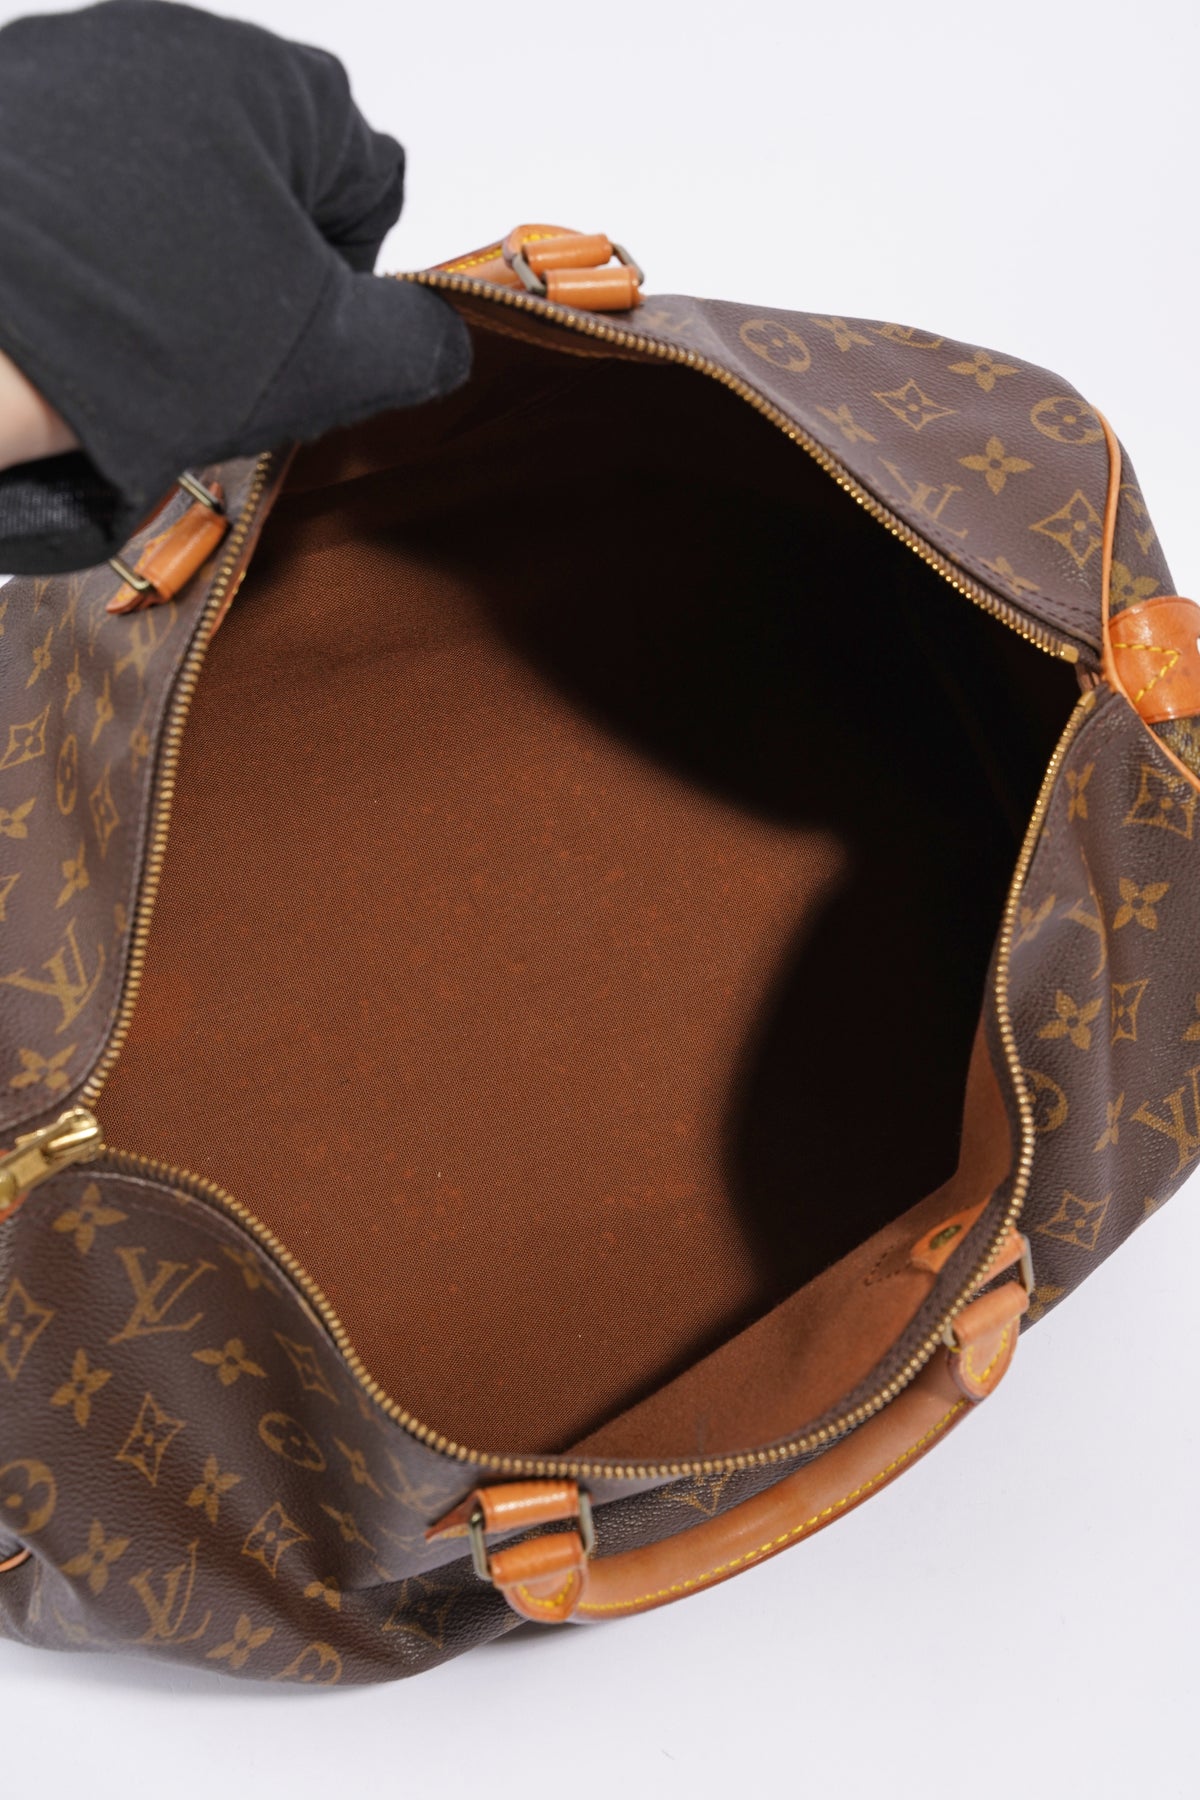 The Louis Vuitton Speedy 40. Classic, large and never out of style. #d